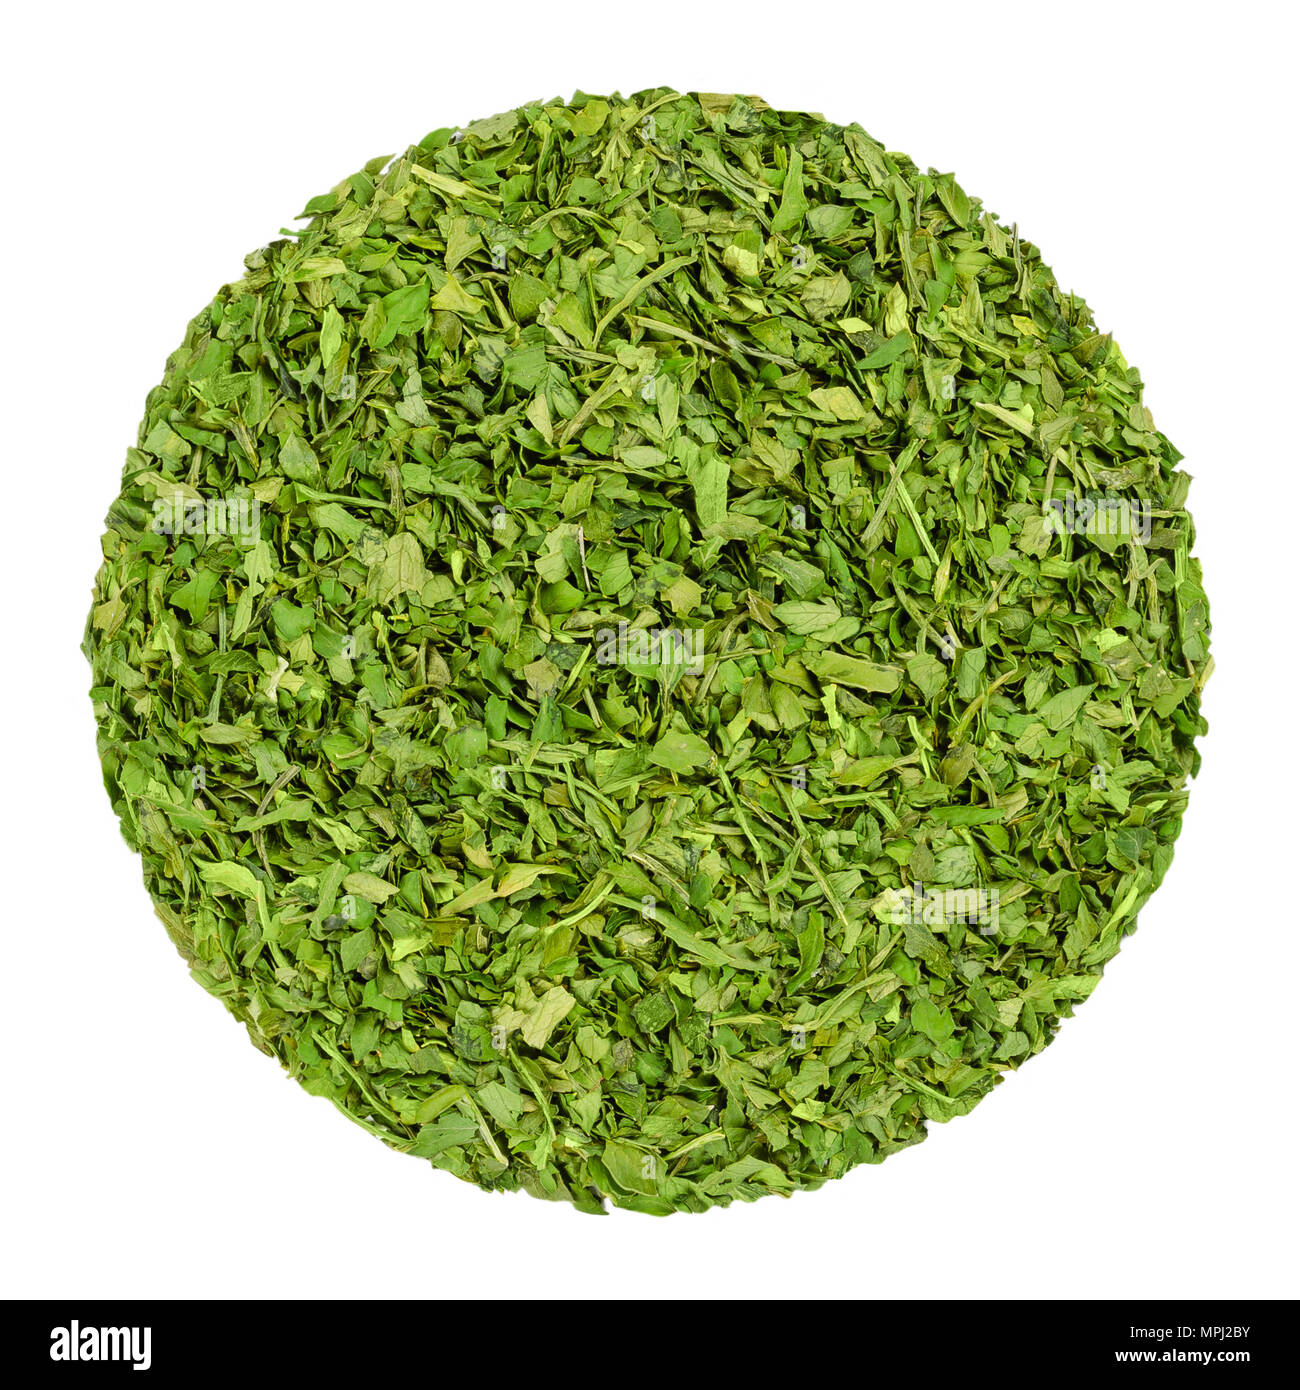 Dried parsley. Herb circle from above, isolated, over white. Disc made of chopped garden parsley, also petersilie. Petroselinum crispum. Green herb. Stock Photo